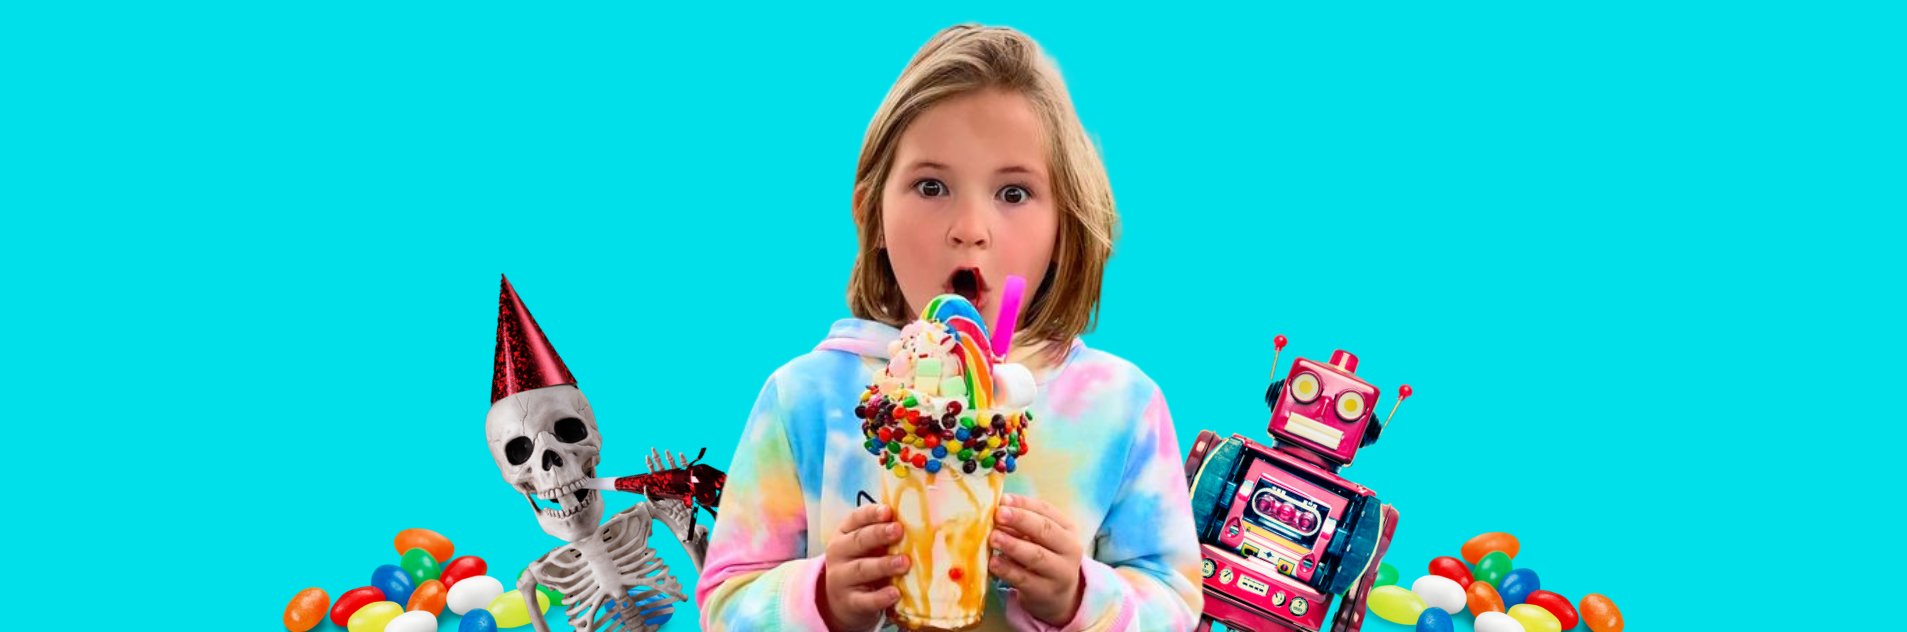 Little girl amazed by a crazy milkshake surrounded by jelly beans and a skeleton and robot behind her 